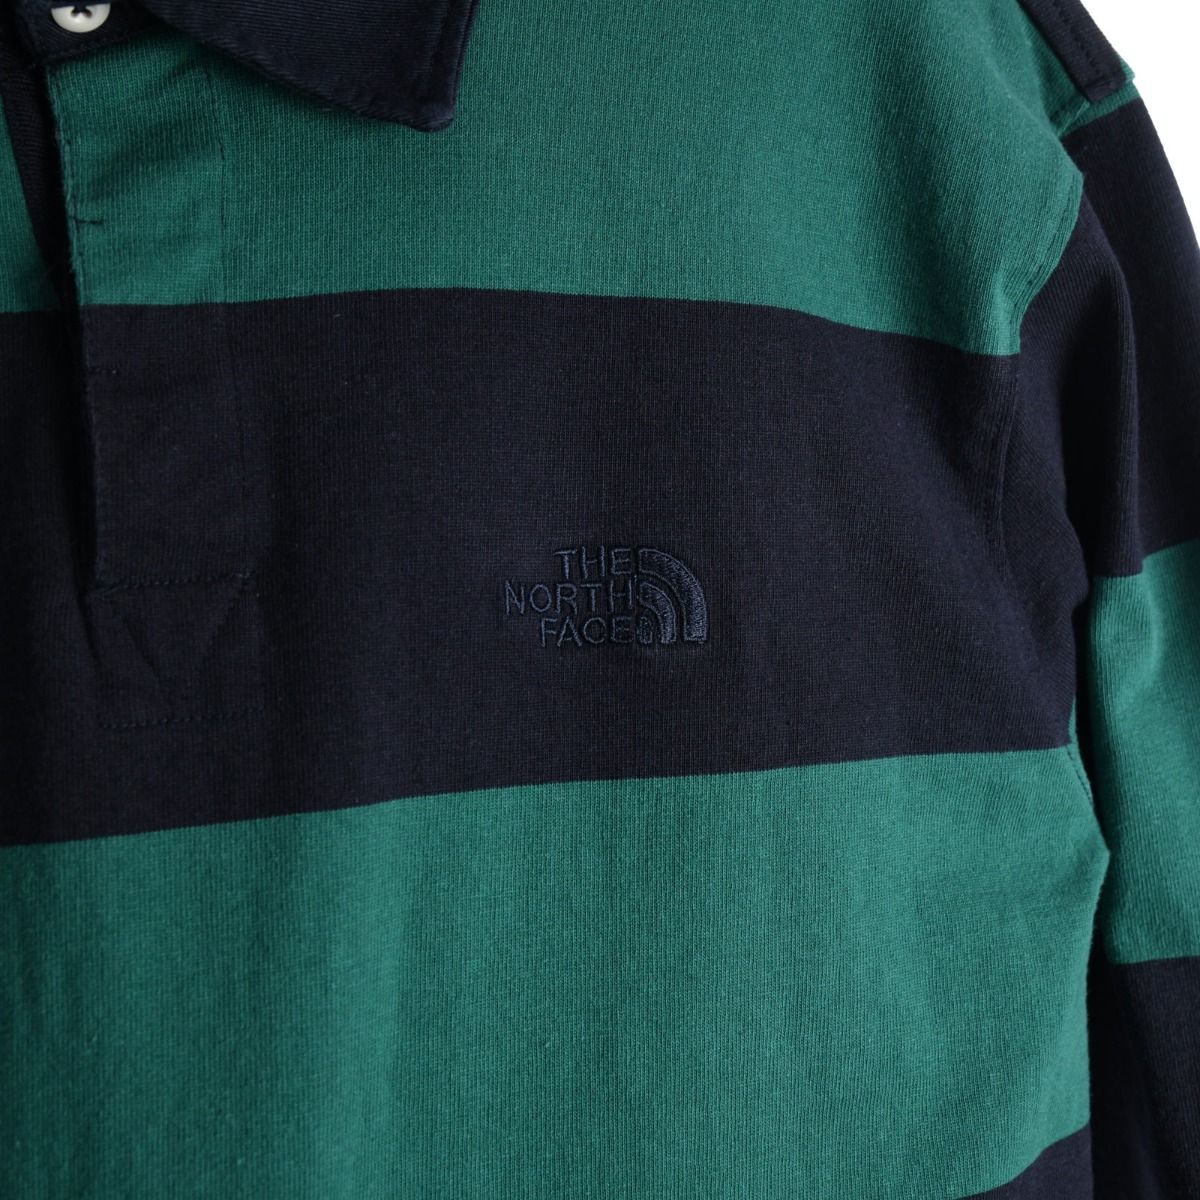 The North Face Rugby Shirt